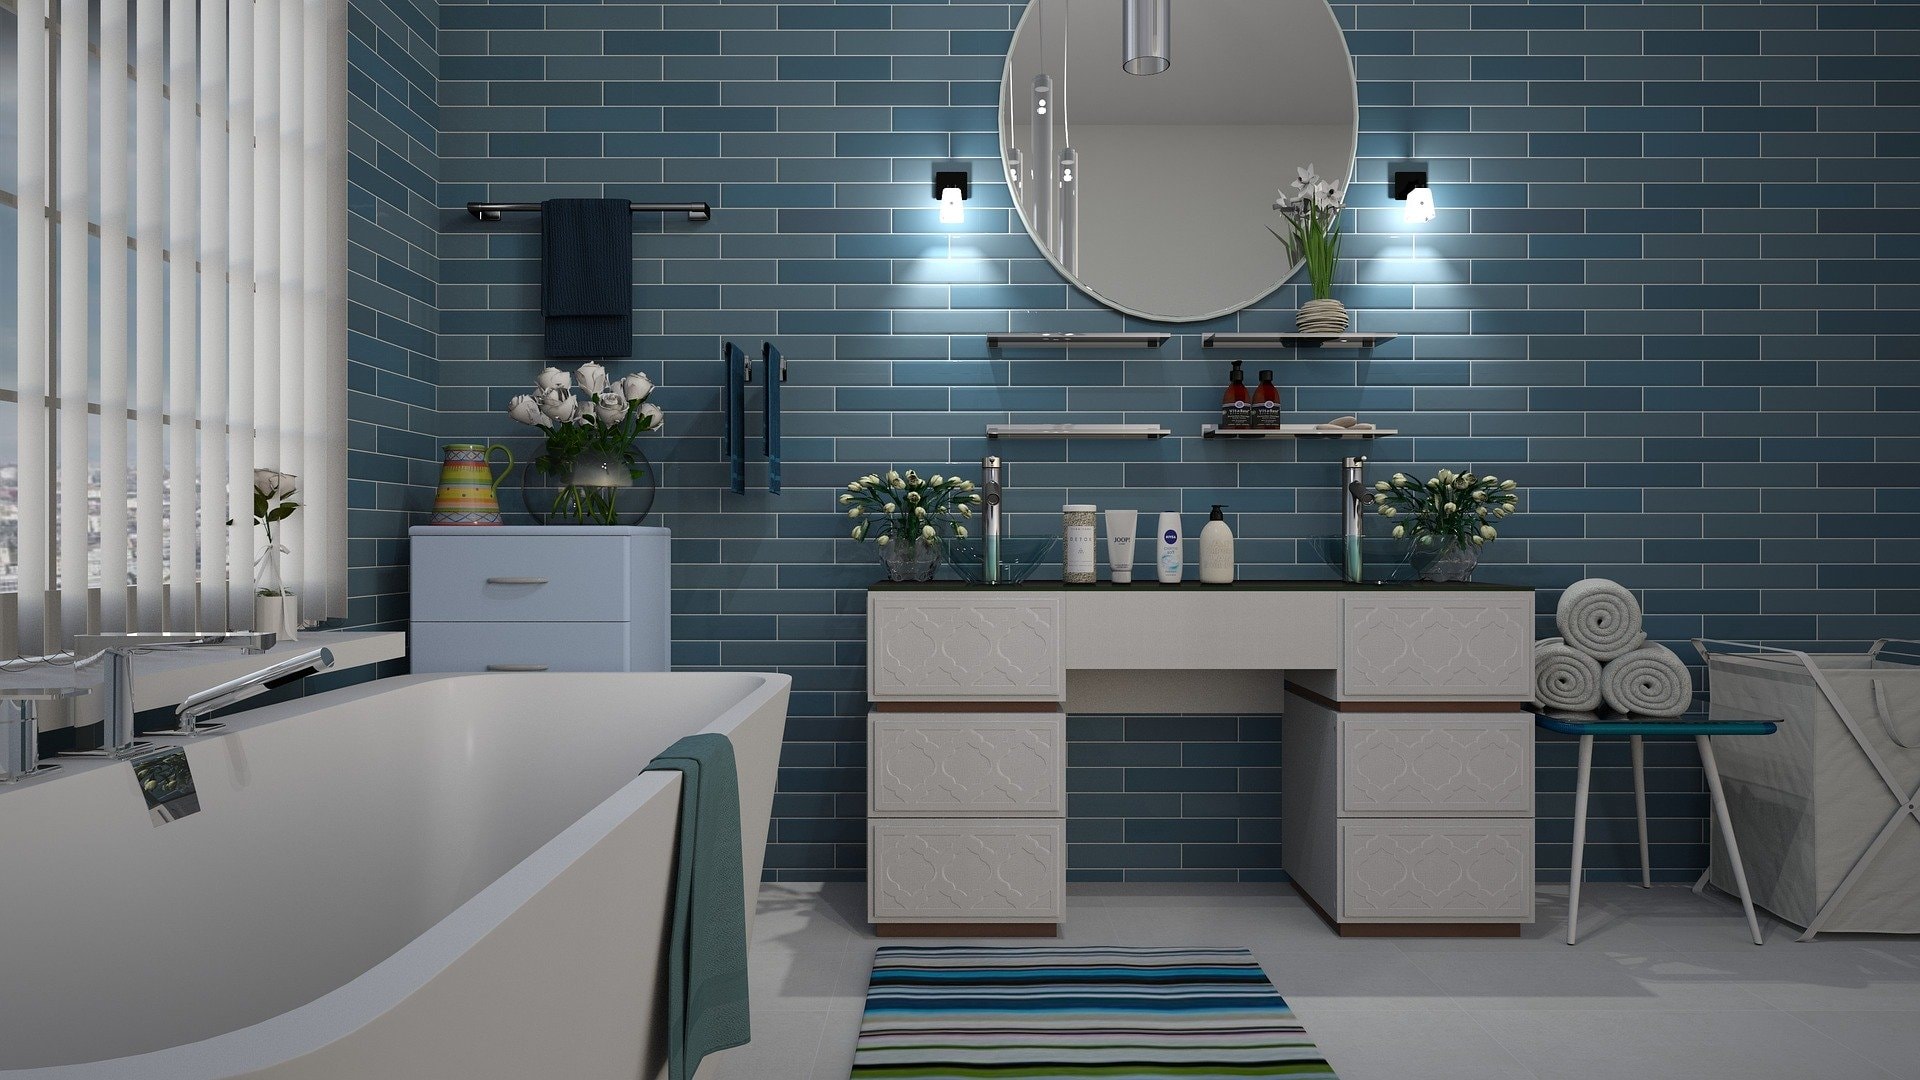 6 Tips to Make Your Bathroom Cozy